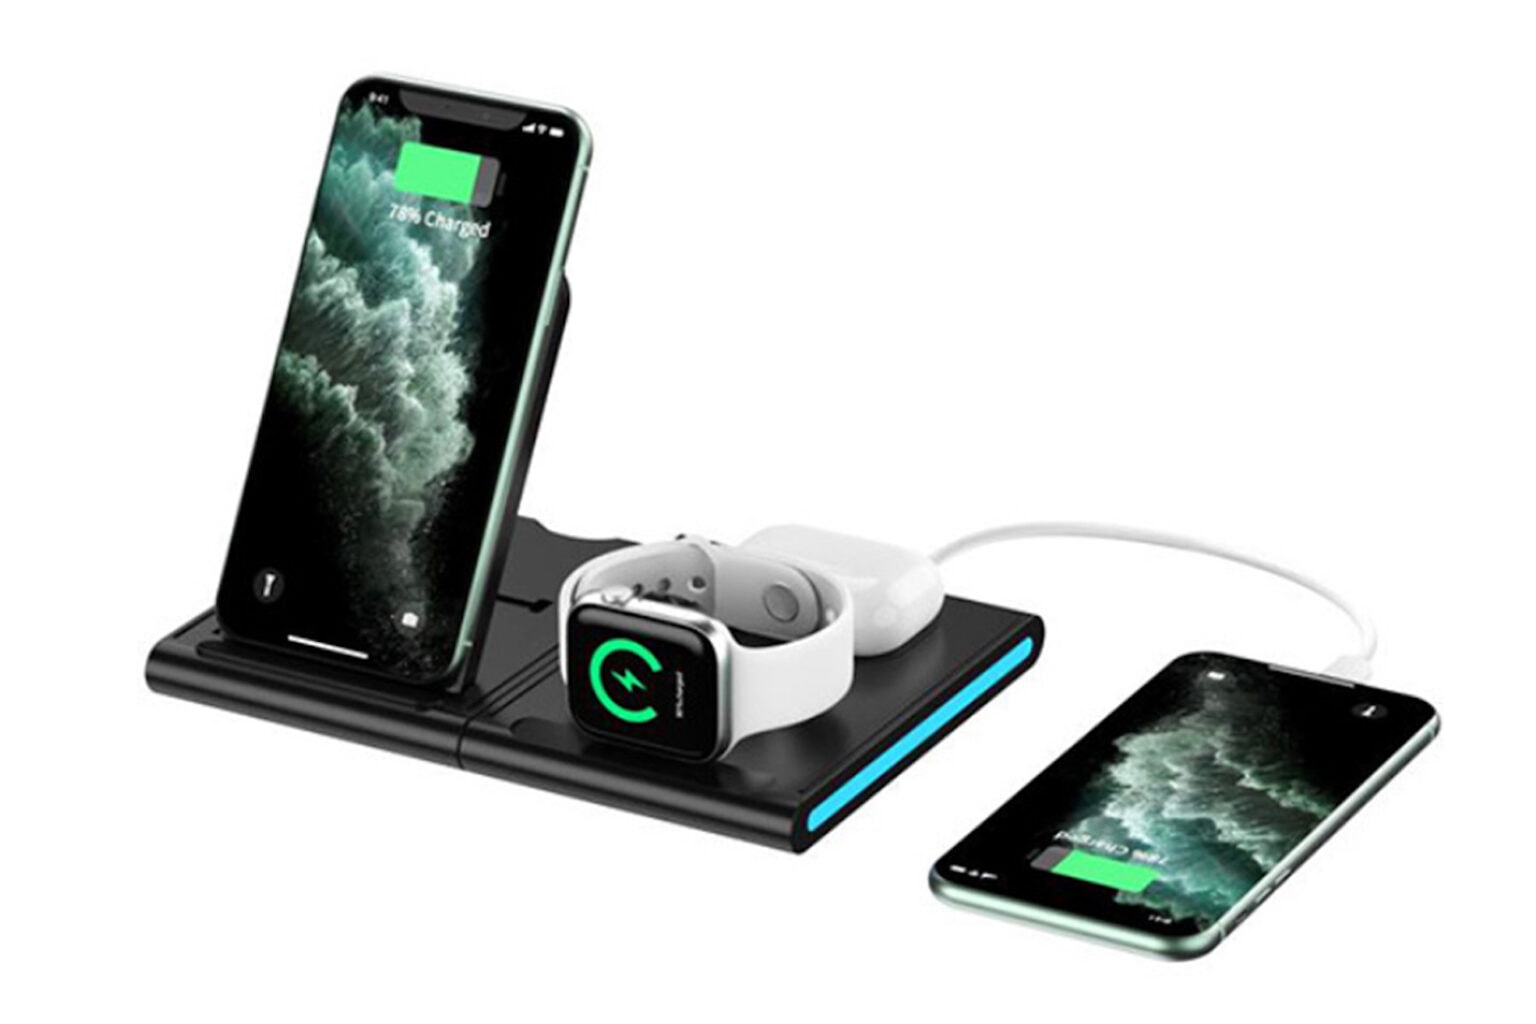 This modular charging station can power 4 devices.